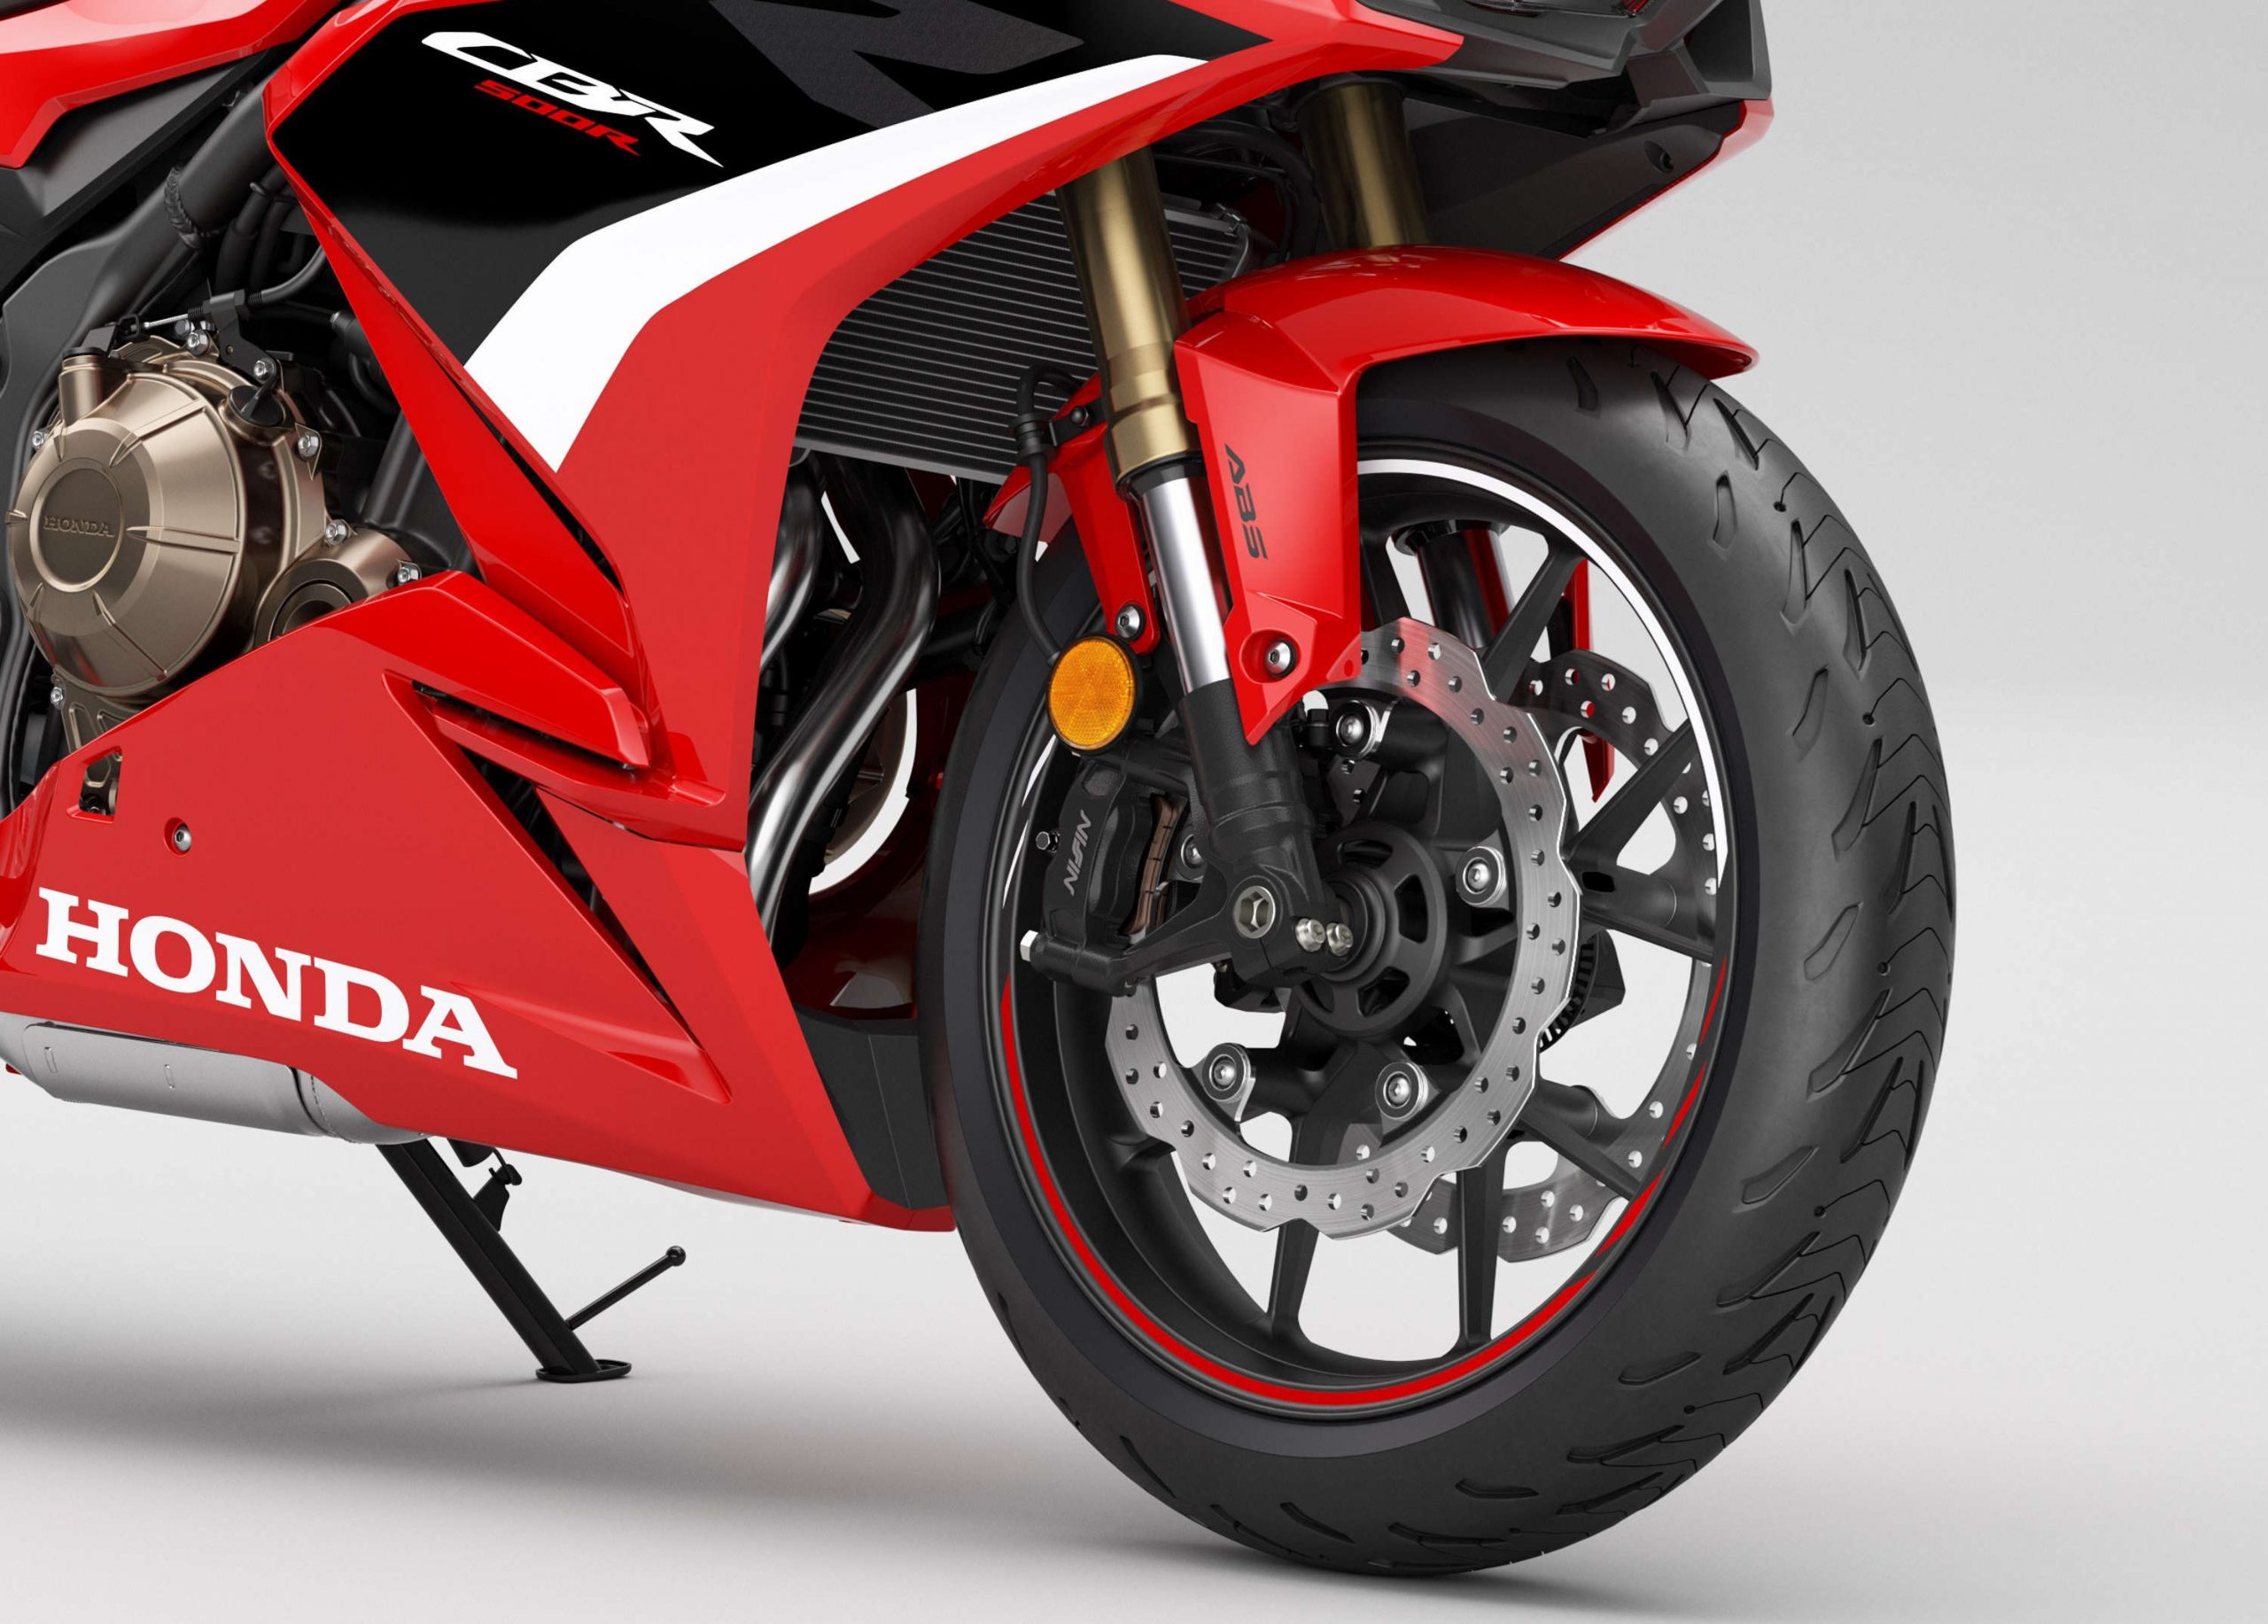 Honda Europe Announces Significant Changes to CB500F, CBR500R and CB500X for 2022. MotorcycleDaily.com News, Editorials, Product Reviews and Bike Reviews